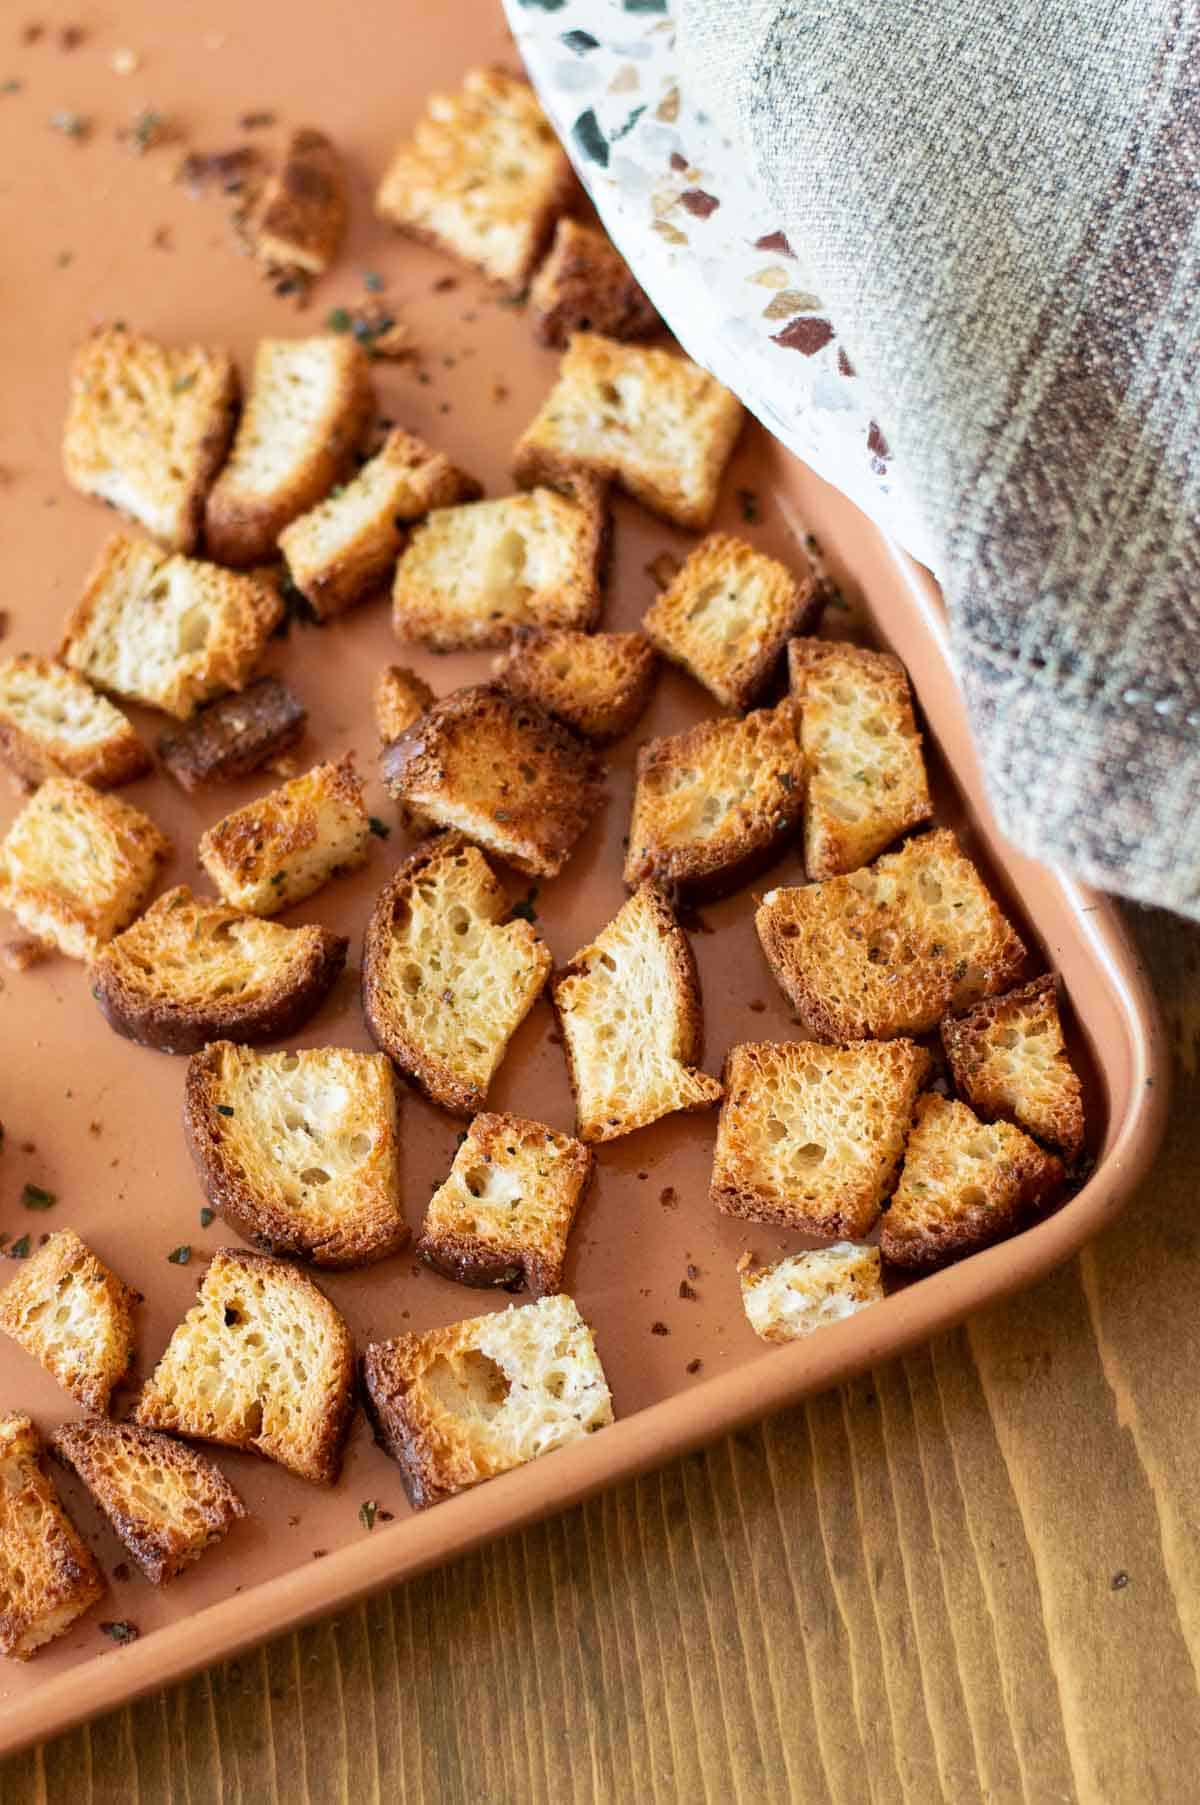 Cooked croutons spread on pink tray with seasoning on the tray.